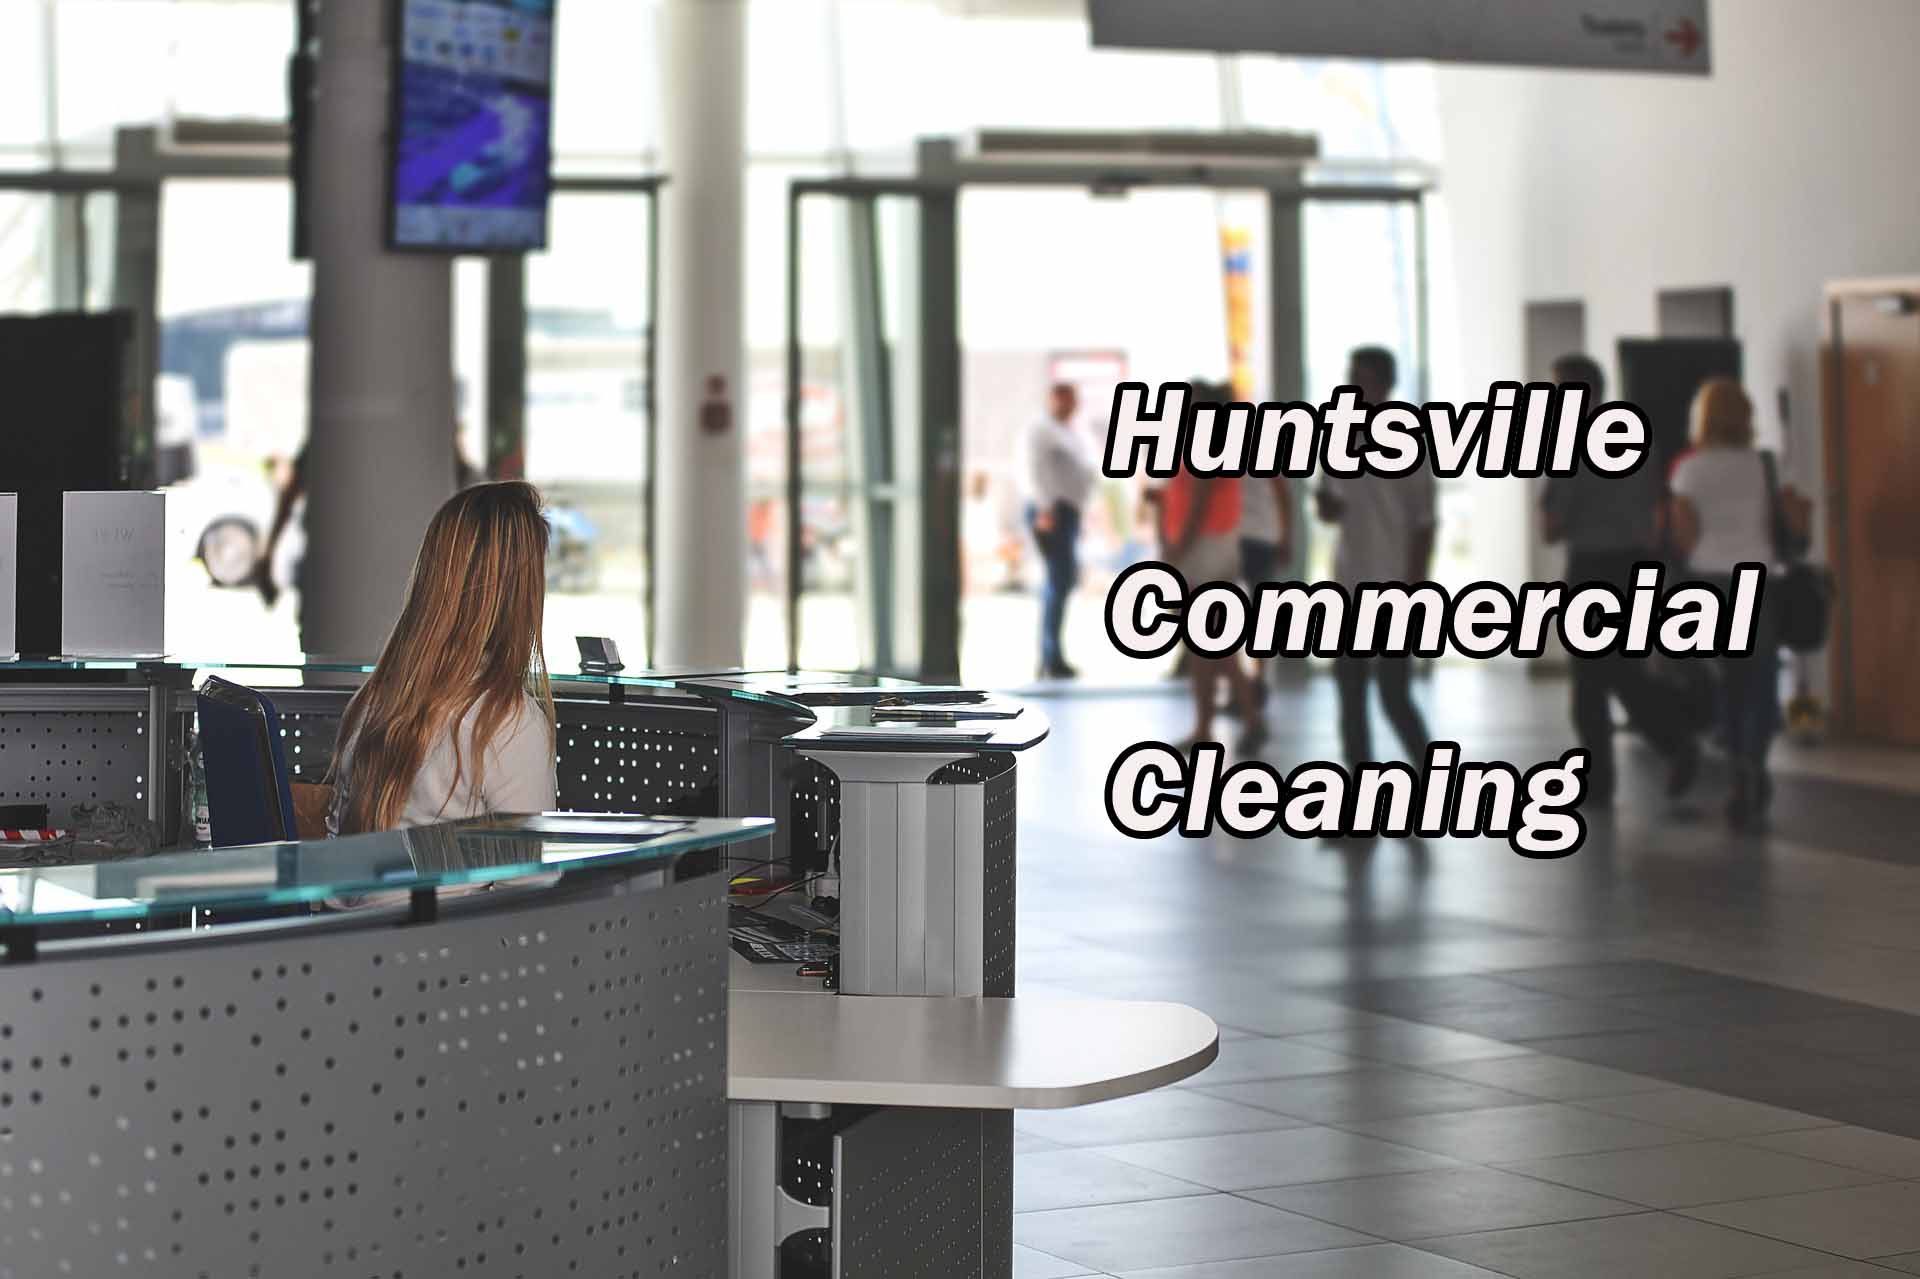 Huntsville Commercial Cleaning